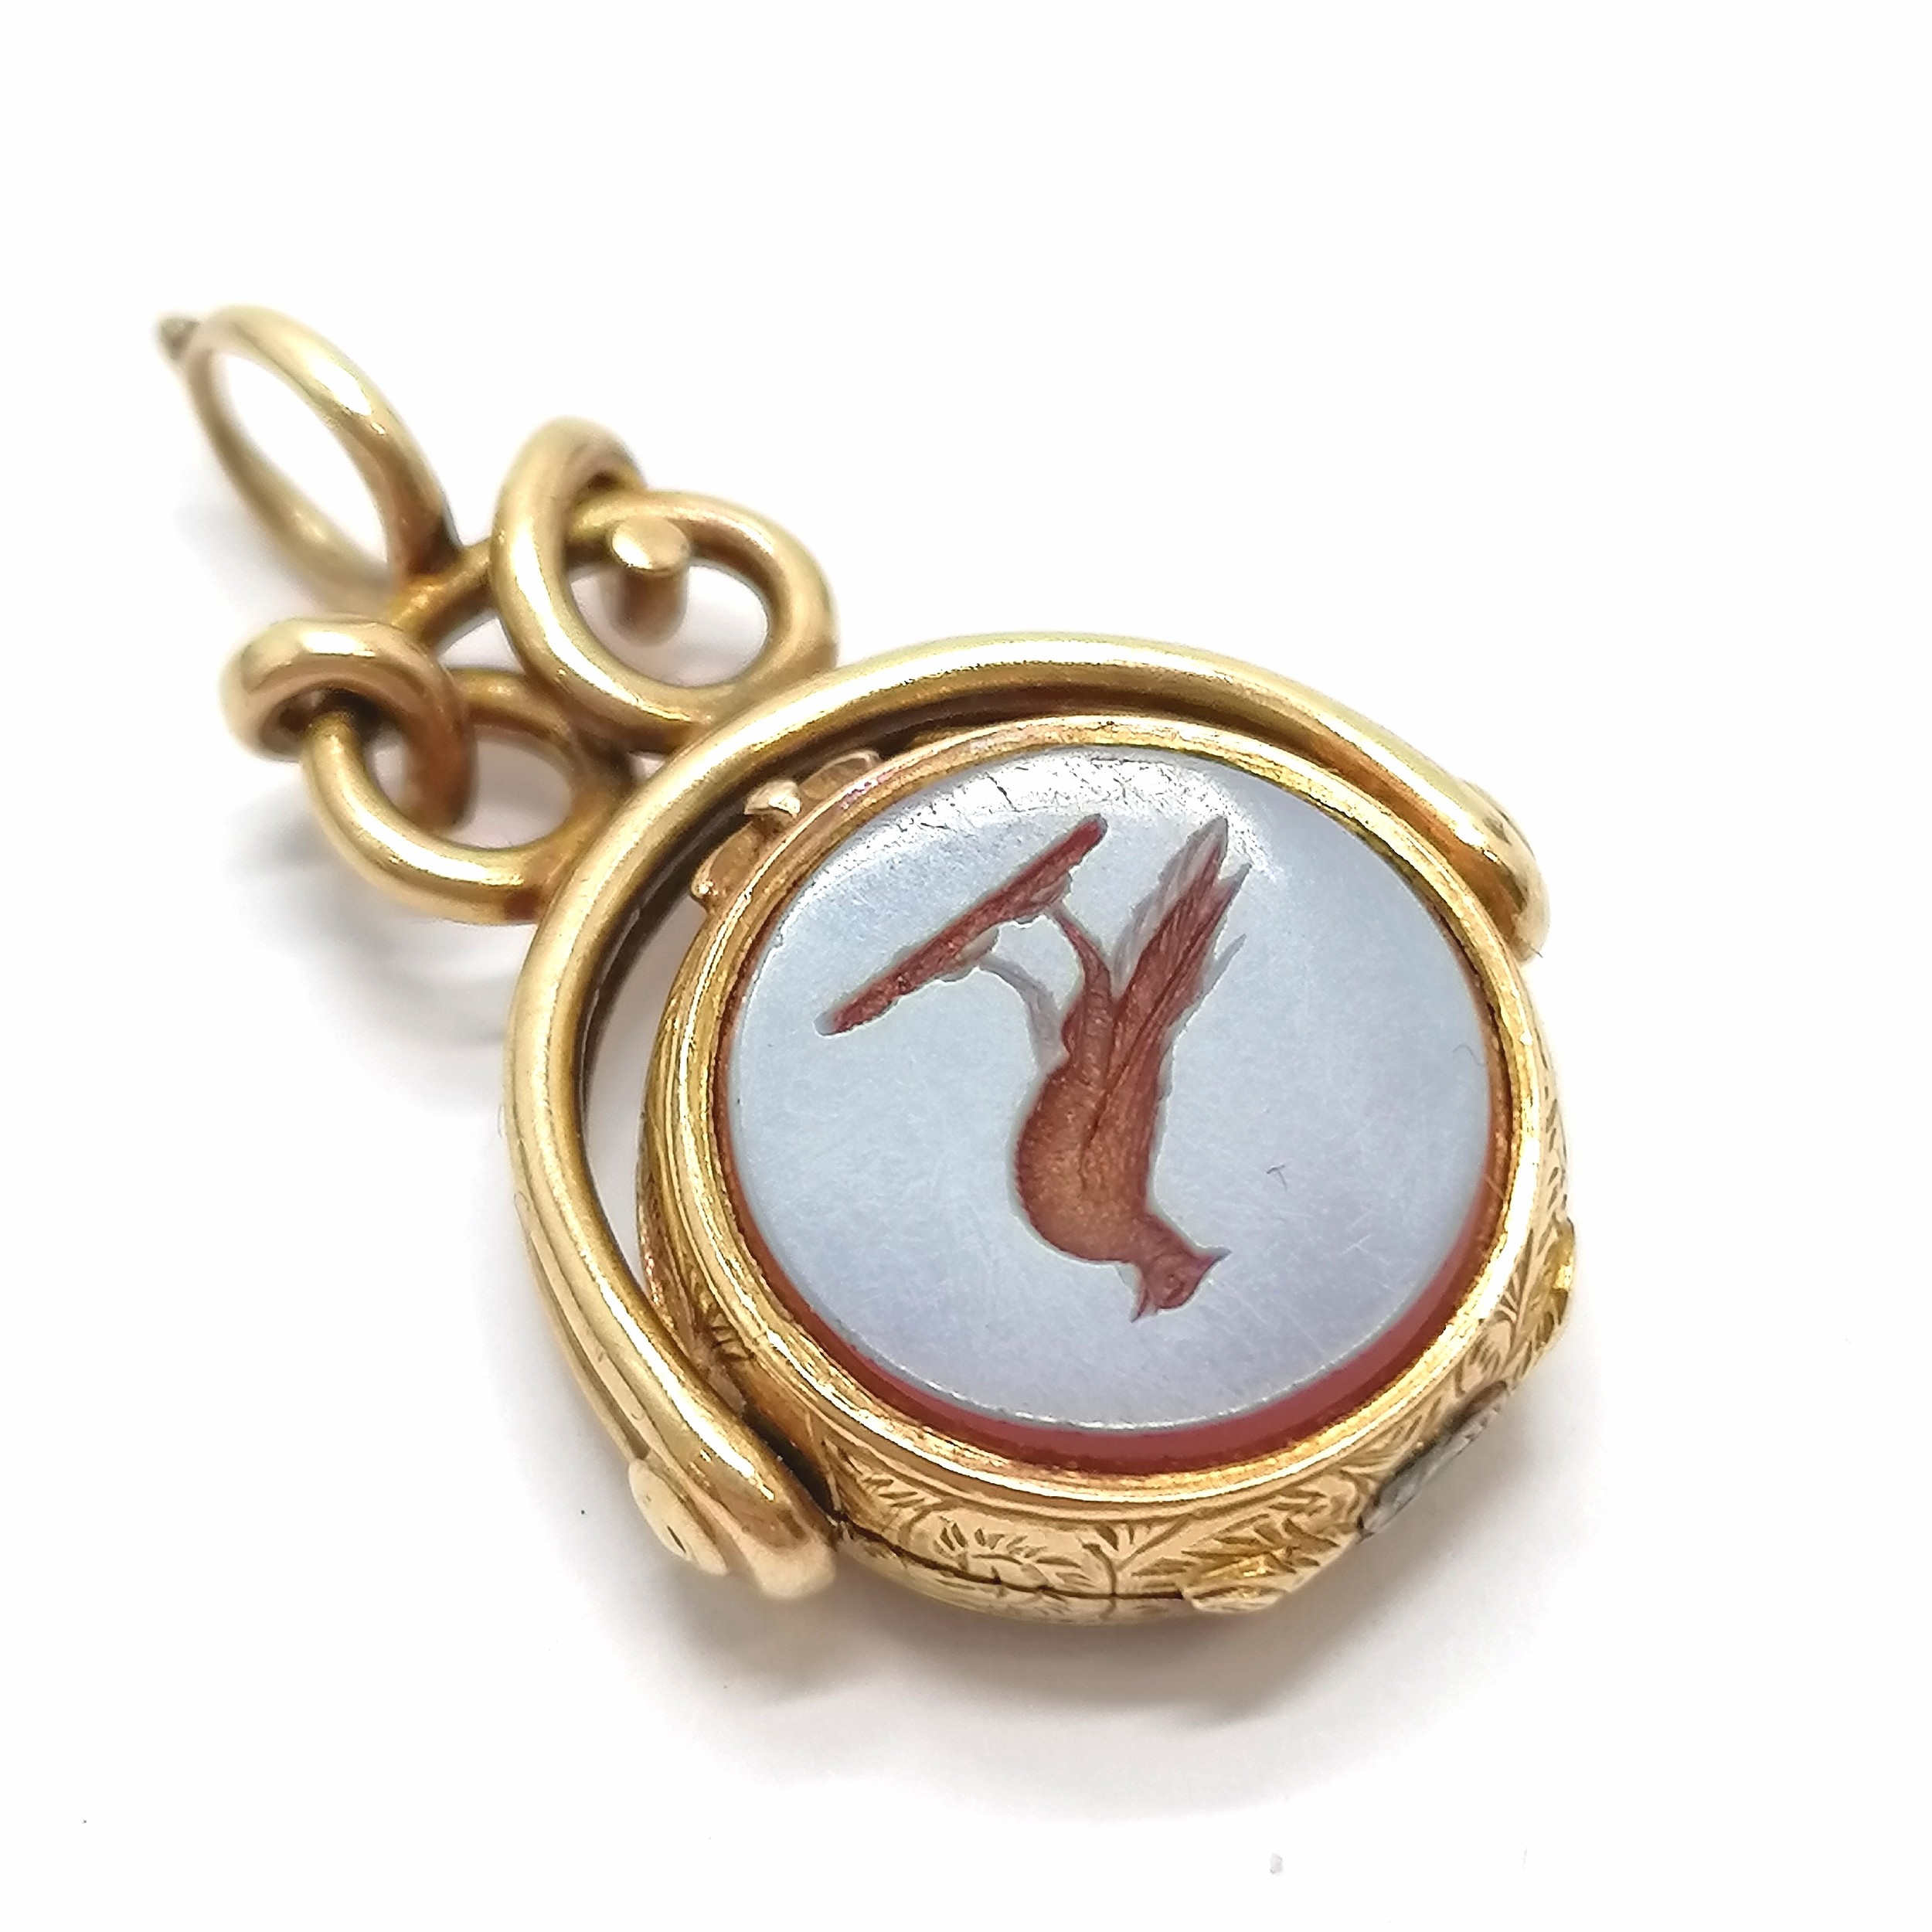 Unmarked antique gold (touch tests as higher carat) RARE swivel fob locket with sardonyx and - Image 5 of 5